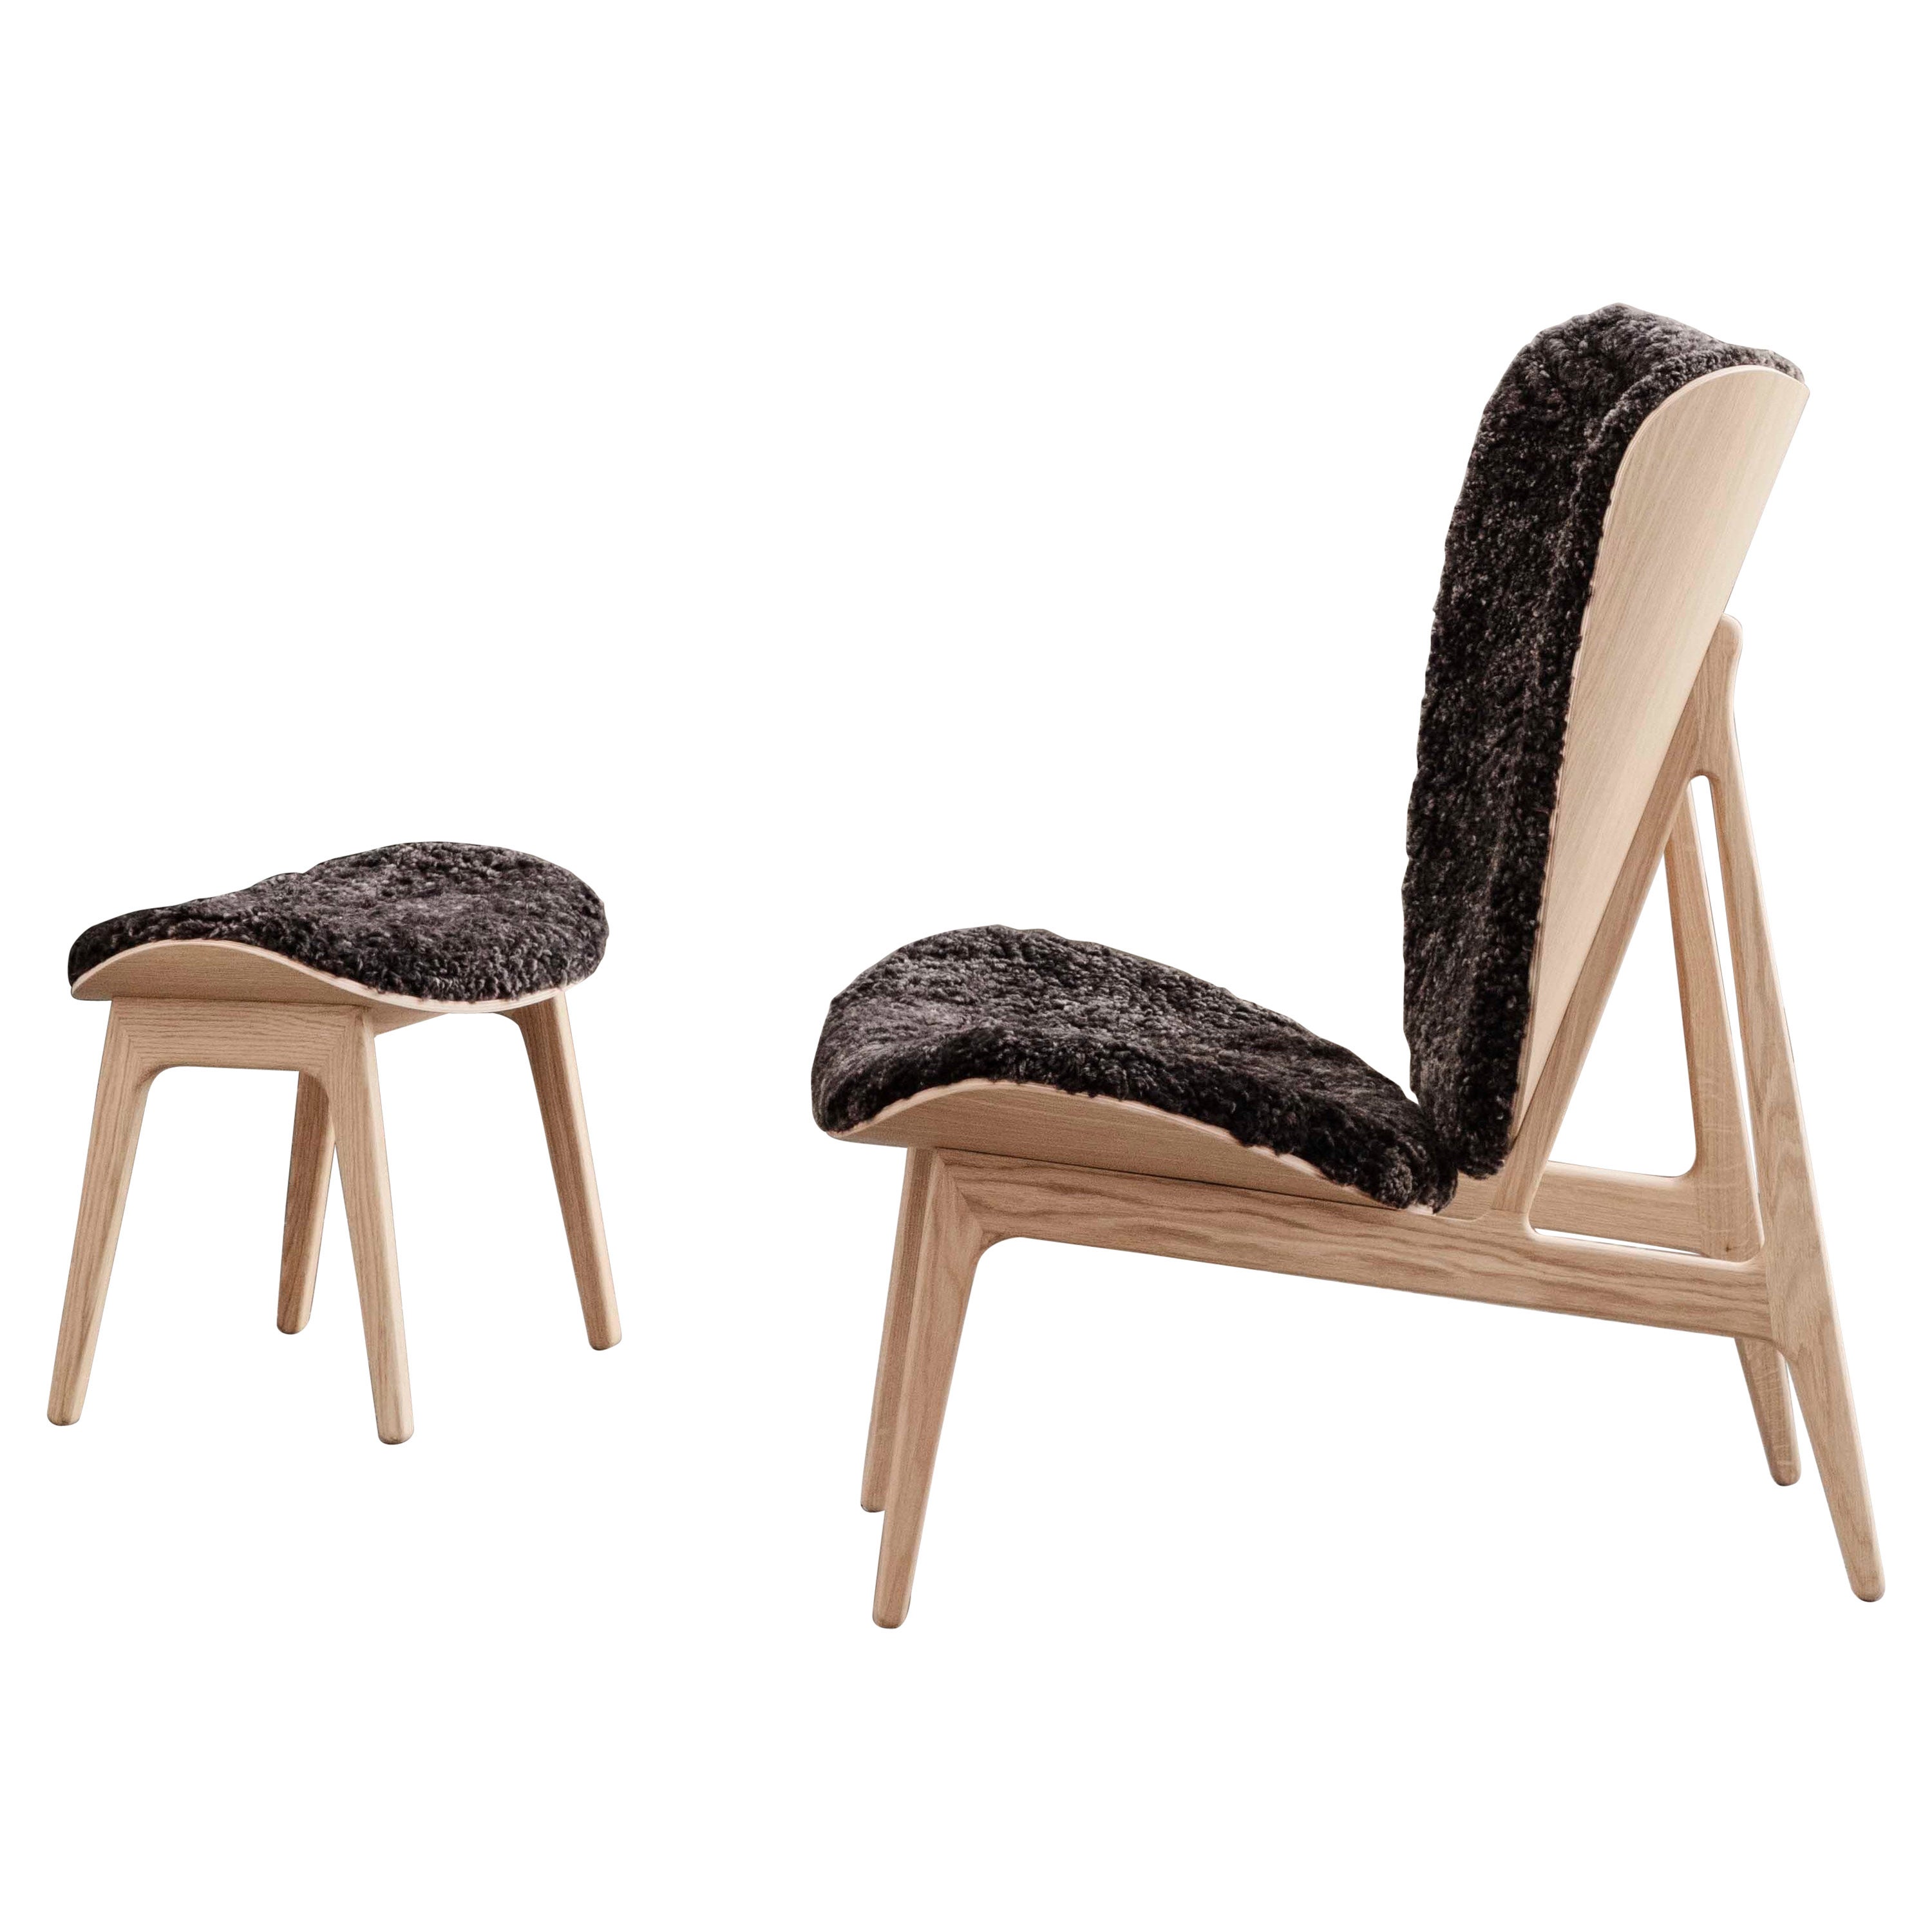 'Elephant' Lounge Chair + Stool, Natural Oak, Sheepskin Set by Norr11 For Sale